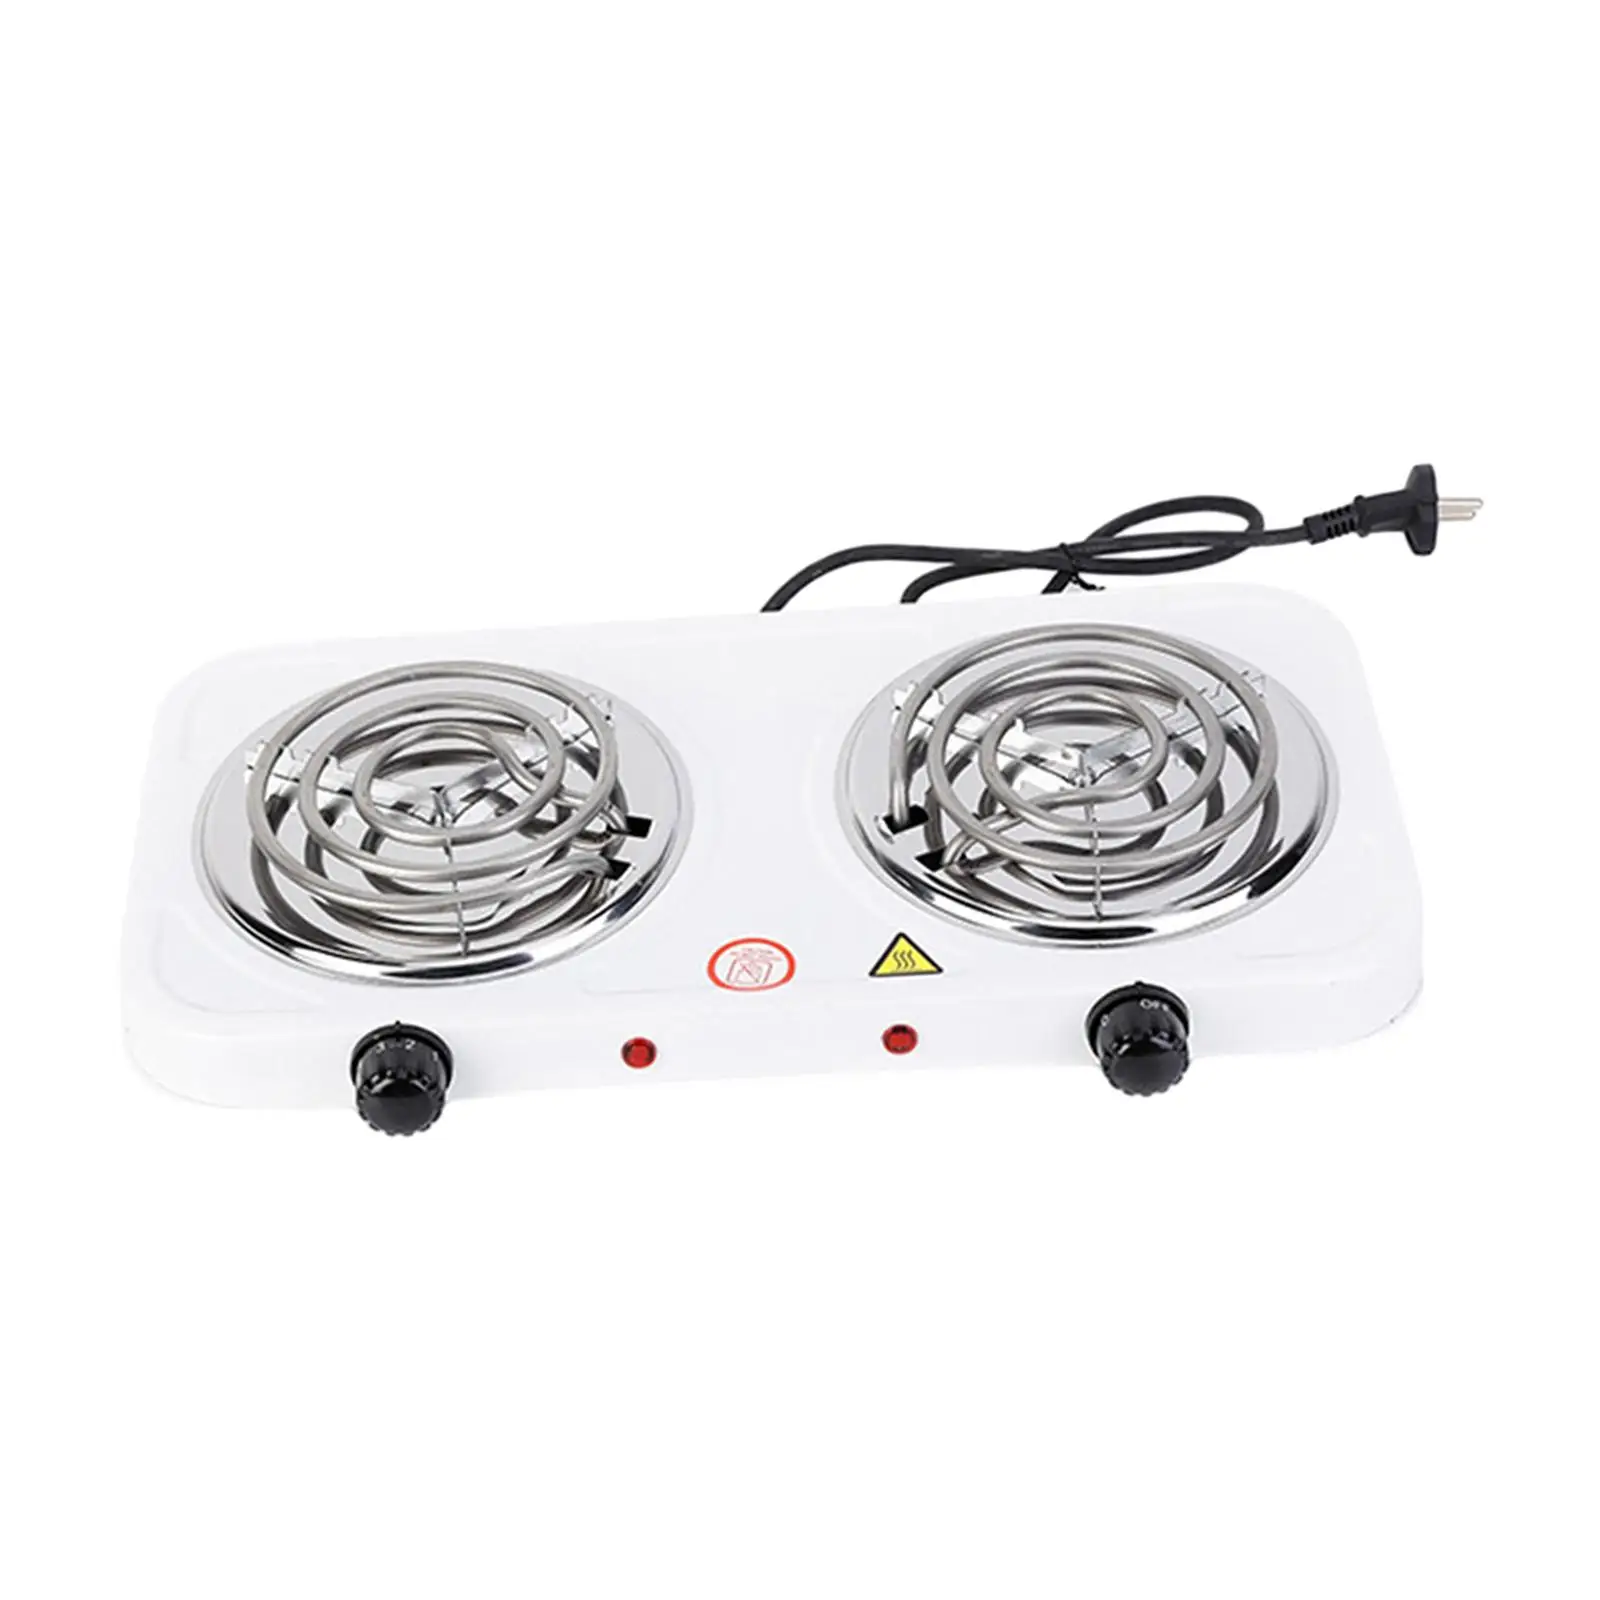 Electric Coil Burner 2000W Hotplate Easy to Clean Home Outdoor Adjustable Temperature Hot Plate with Indicator Lights Practical